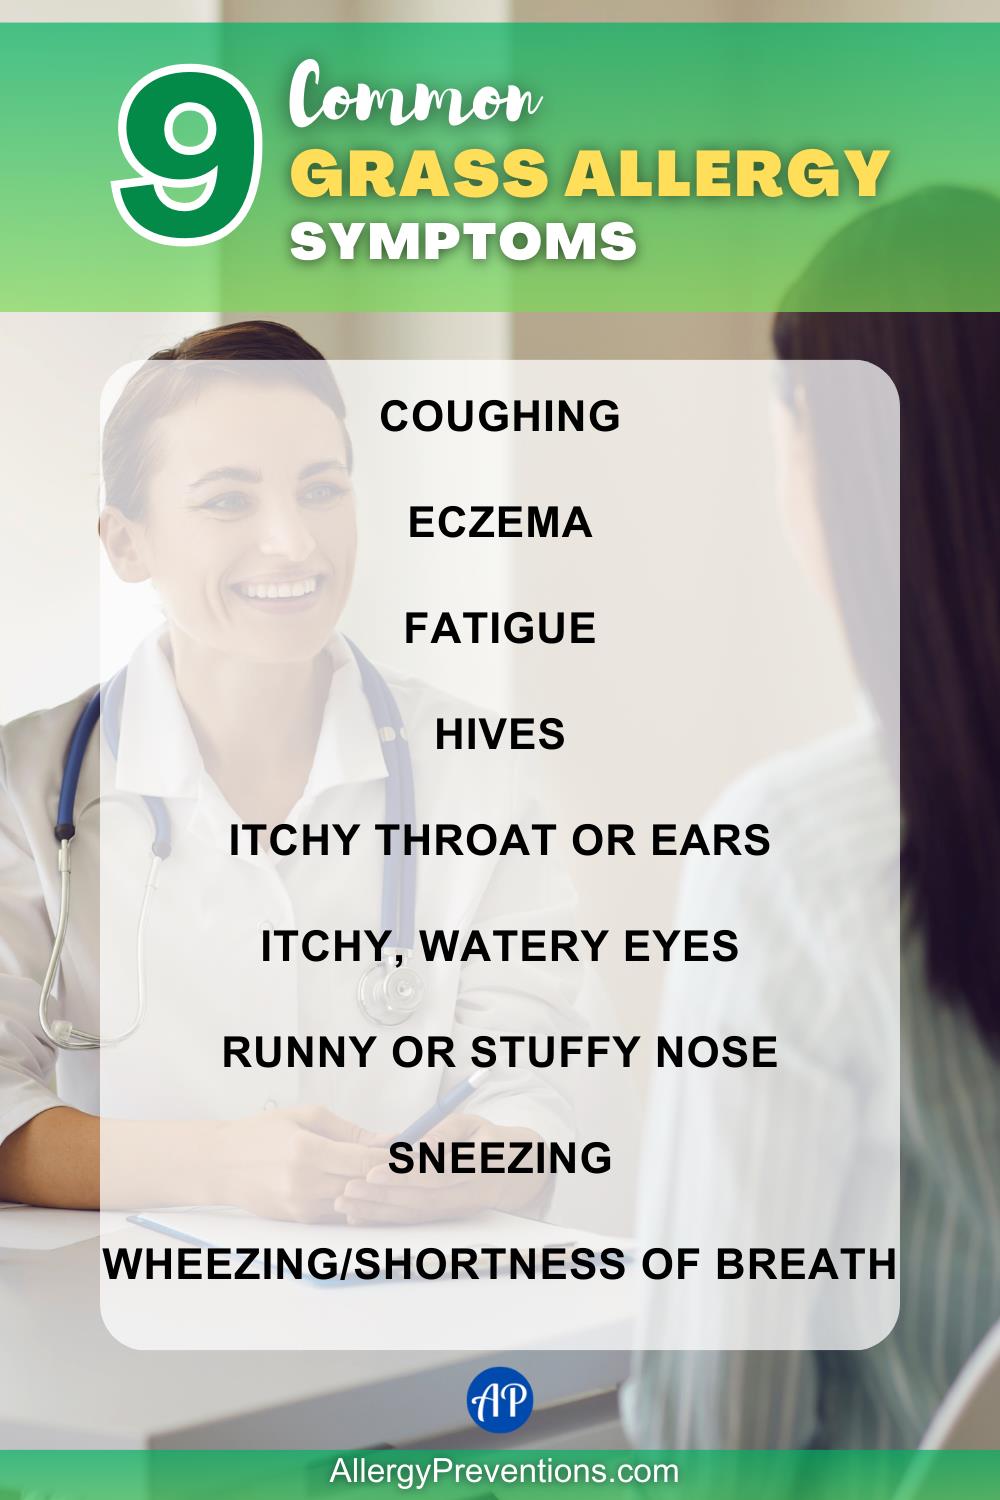 Common grass allergy symptoms infographic. The 9 common grass allergy symptoms are: Coughing, Eczema, Fatigue, Hives, Itchy Throat or Ears, Itchy, Watery Eyes, Runny or Stuffy Nose, Sneezing, and Wheezing/Shortness of Breath.